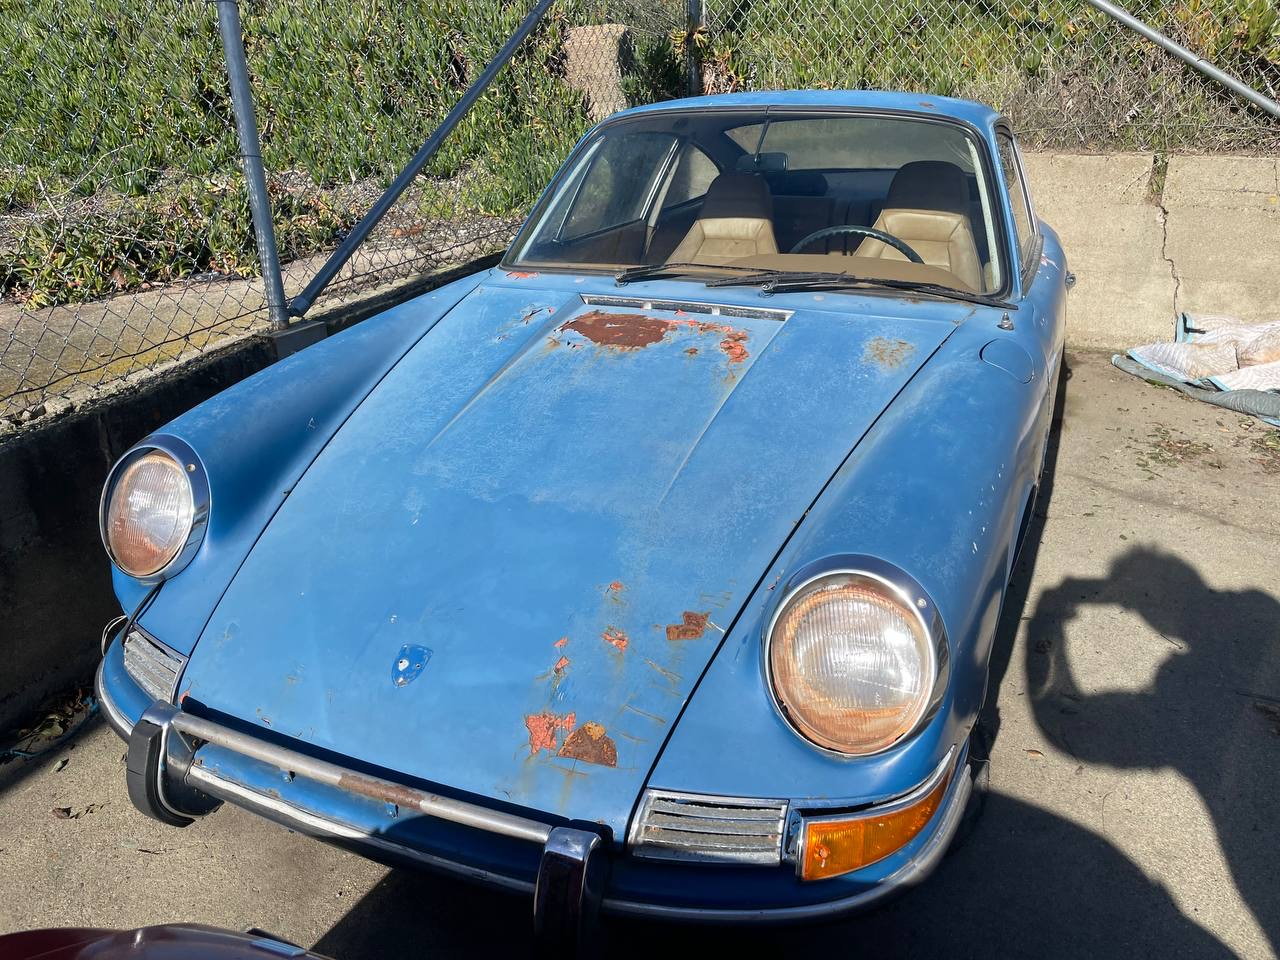 1968 Porsche 911 - 1968 912 Restoration project with 1967 911 engine - Used - VIN 11800000 - 83,000 Miles - 6 cyl - 2WD - Manual - Coupe - Blue - San Francisco, CA 94121, United States